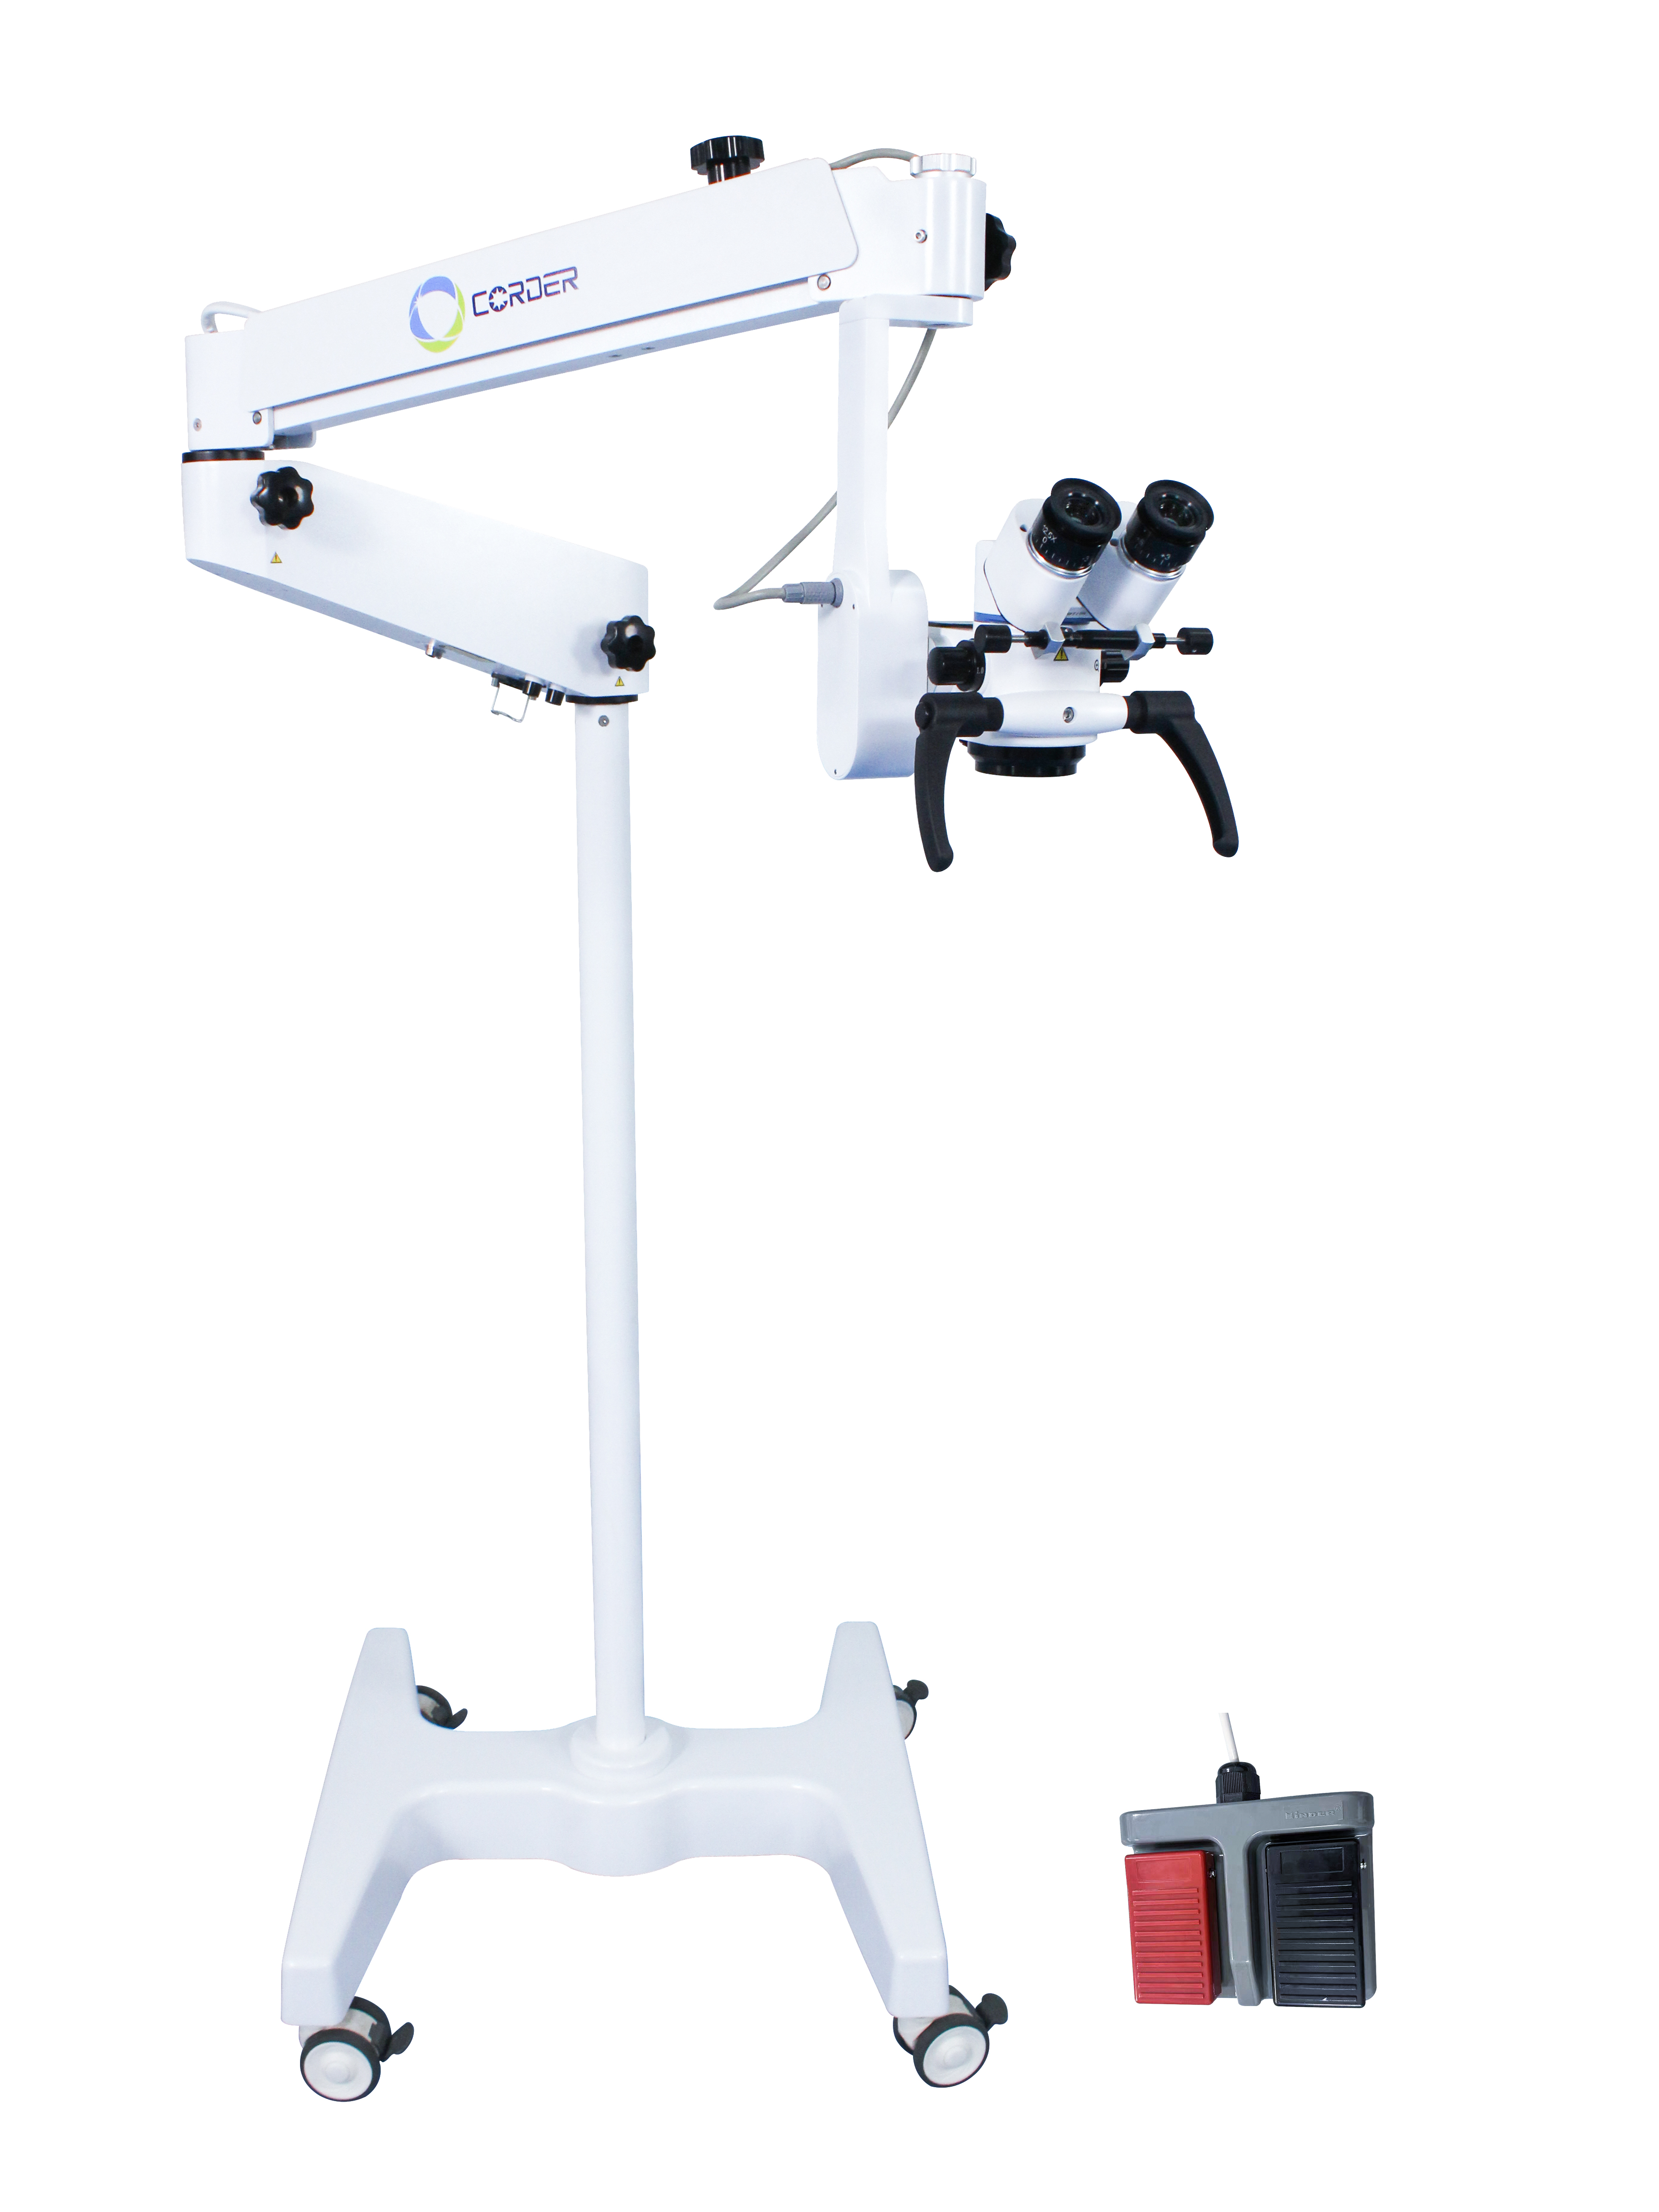 https://www.vipmicroscope.com/asom-510-3a-portable-ophthalmology-microscope-product/